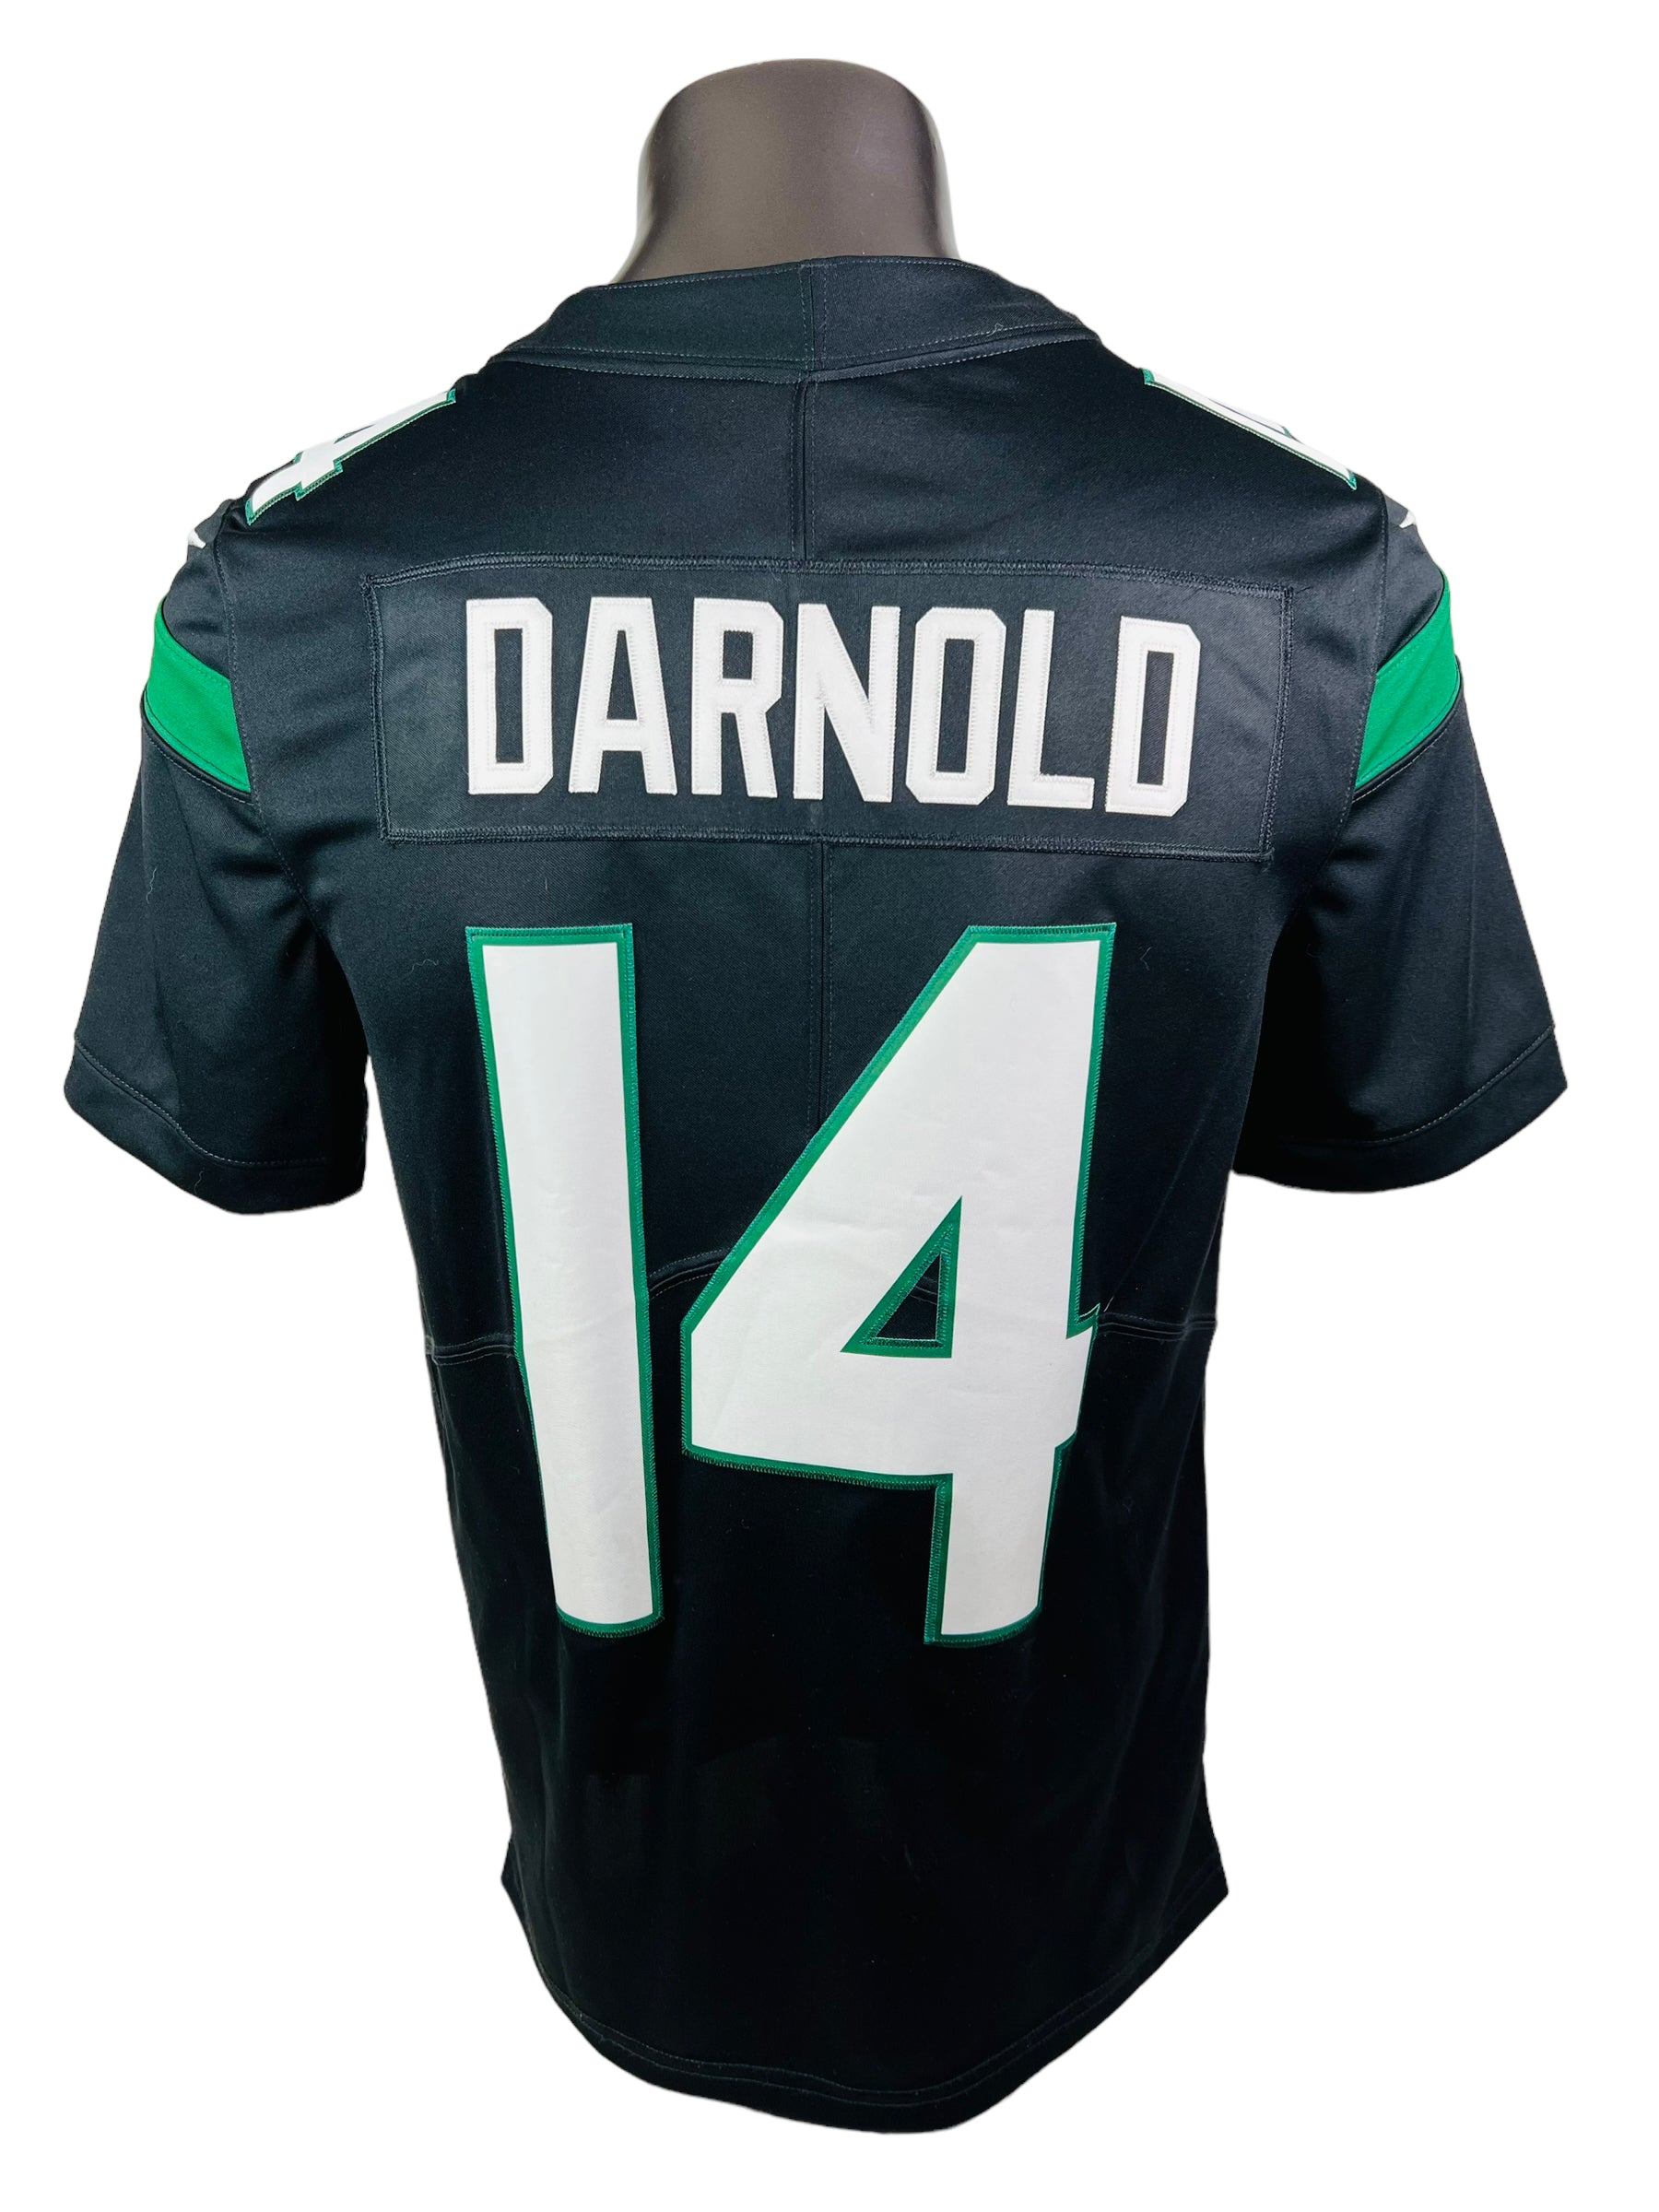 SAM DARNOLD NEW YORK JETS AUTHENTIC NIKE JERSEY ADULT SMALL - Bucks County  Baseball Co.